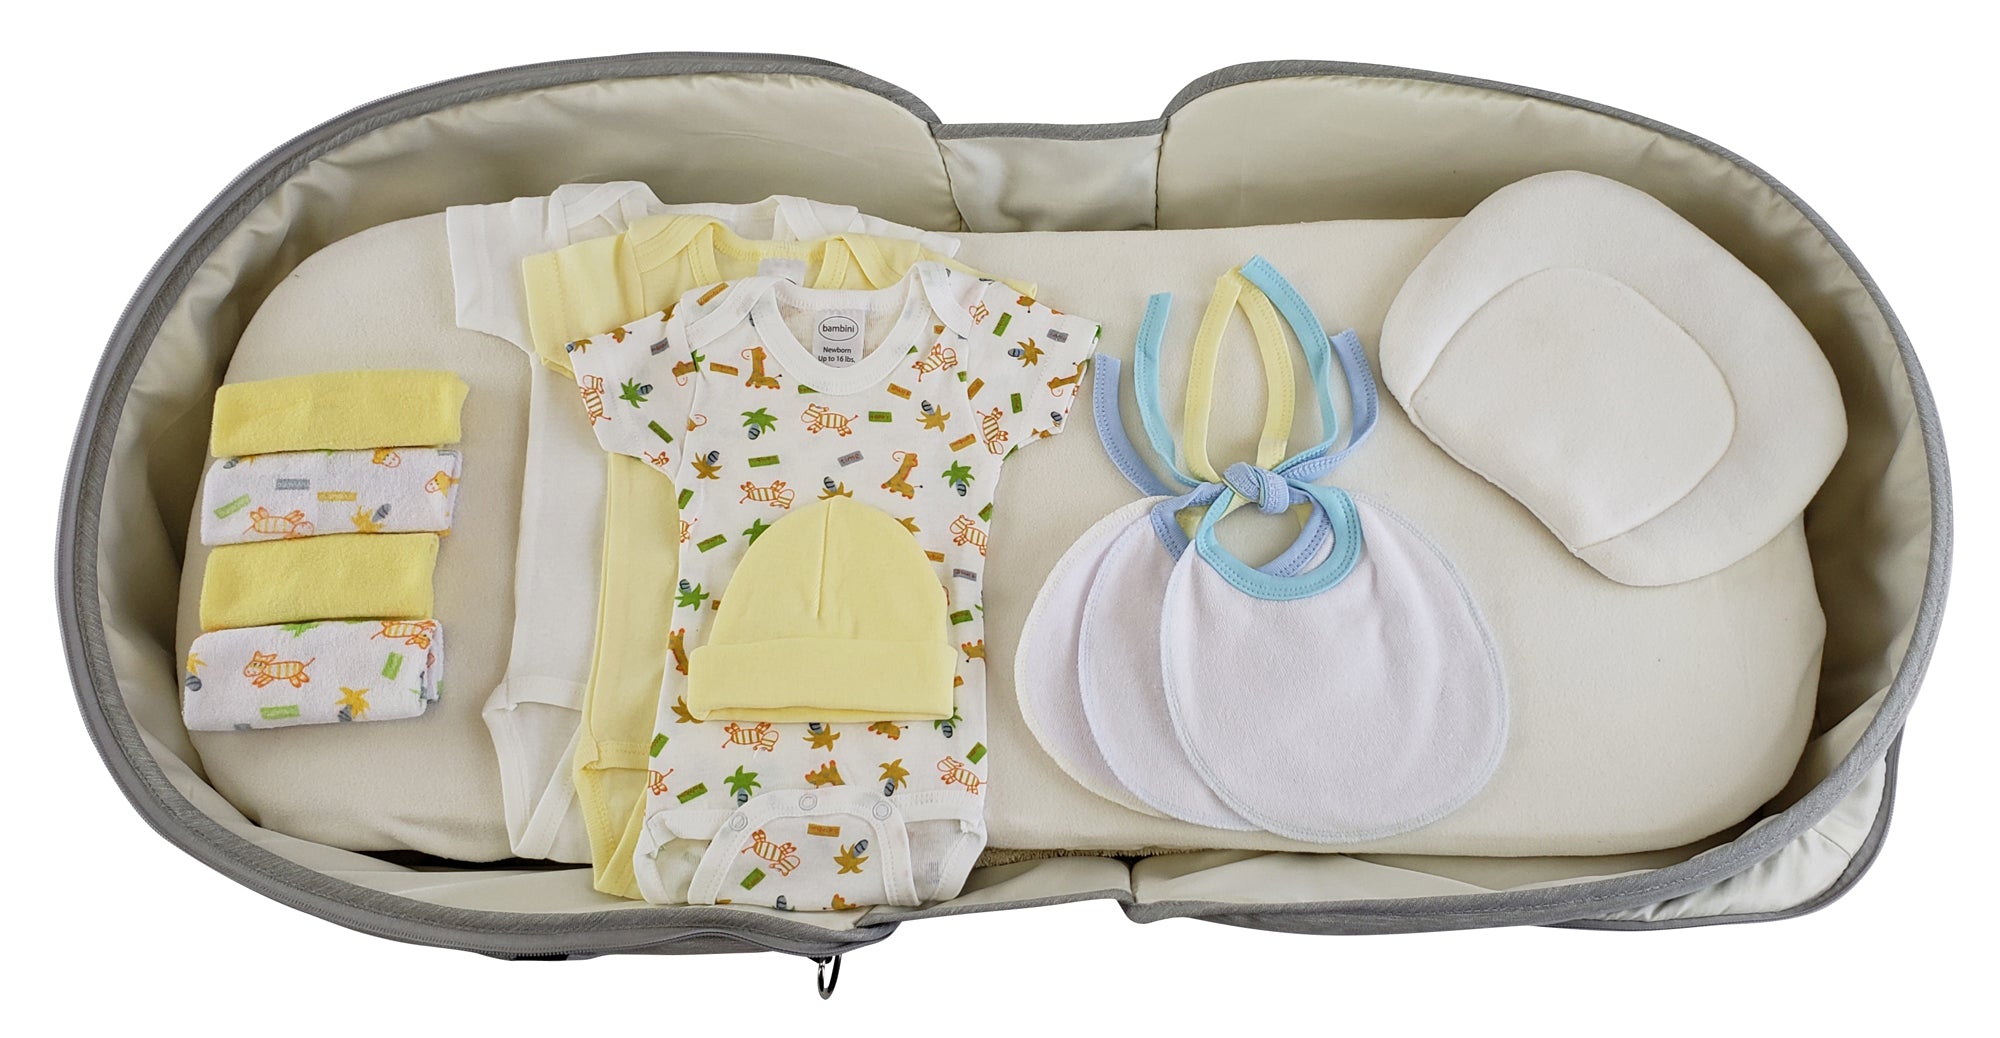 unisex diaper bag with free layette set